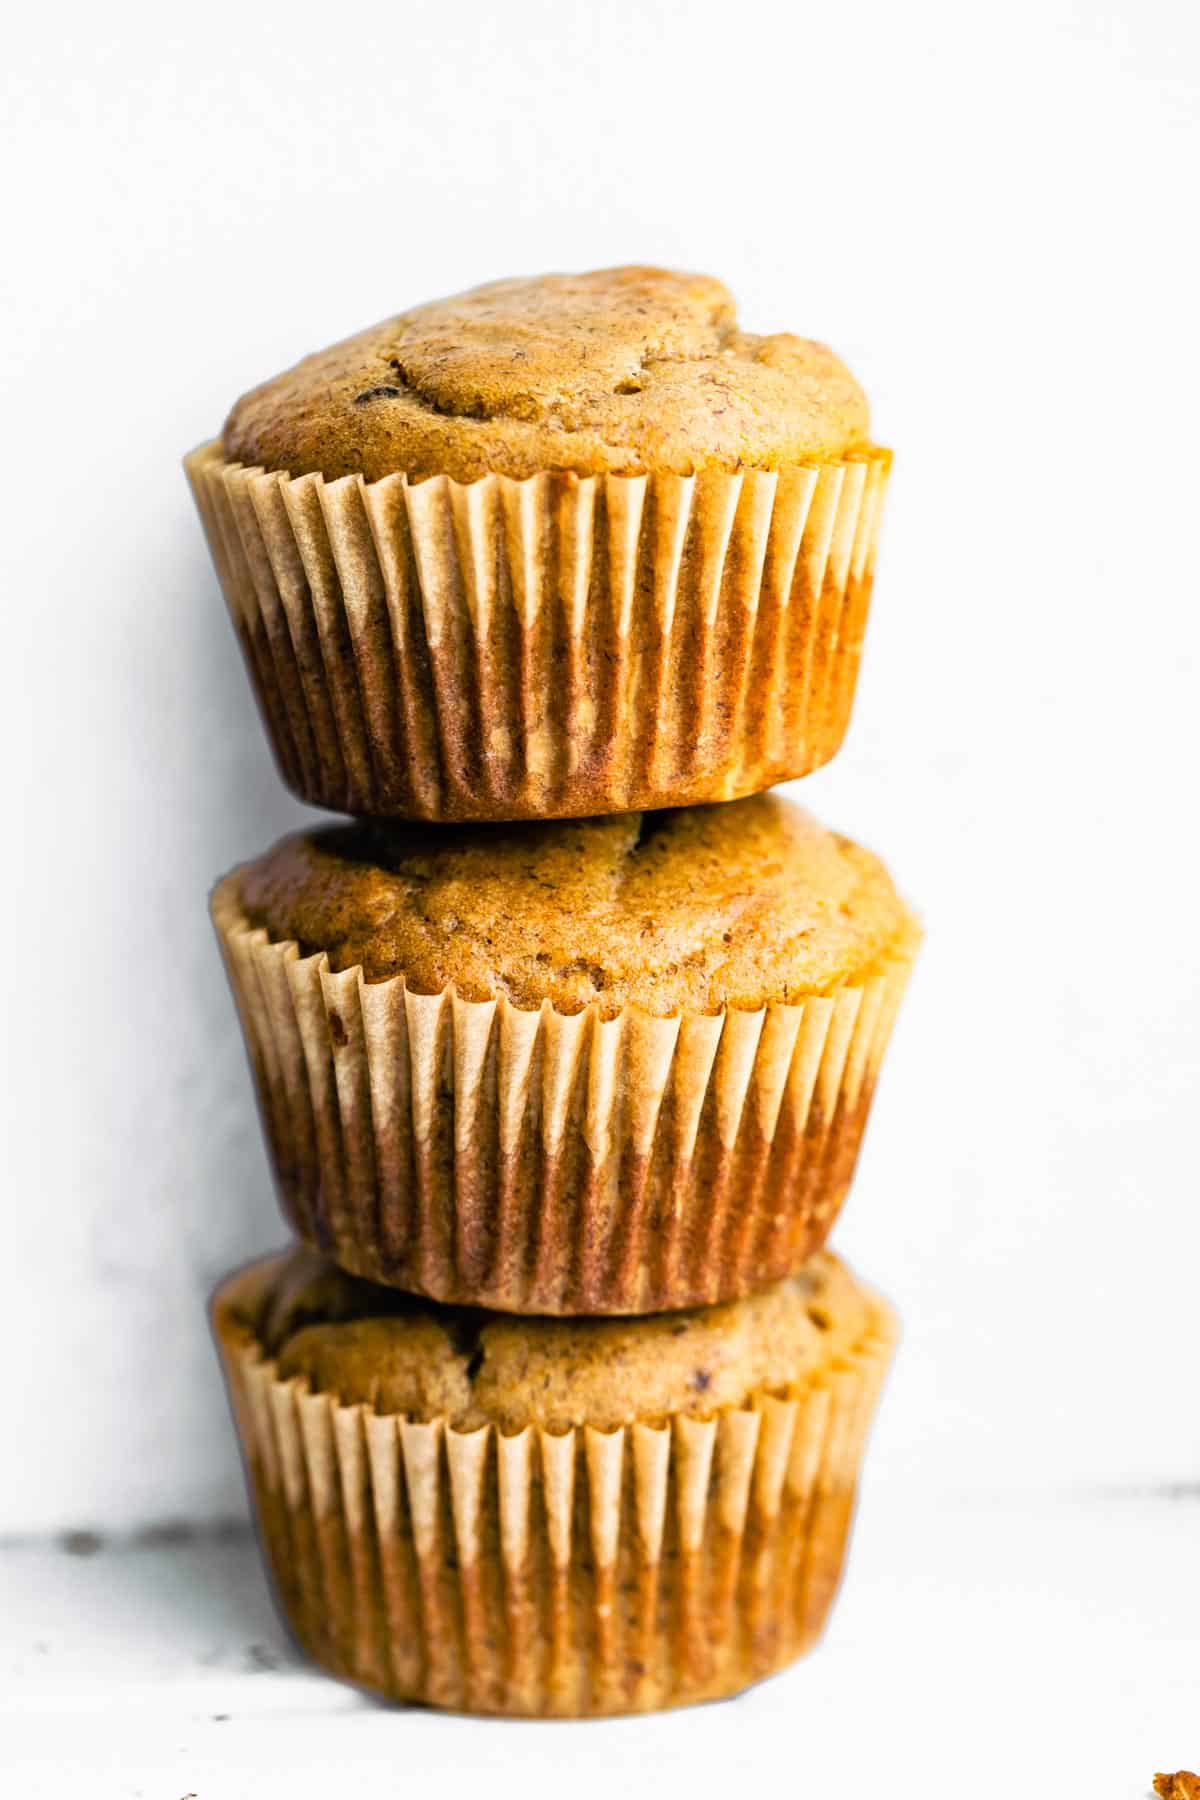 A stack of three healthy peanut butter banana muffins.